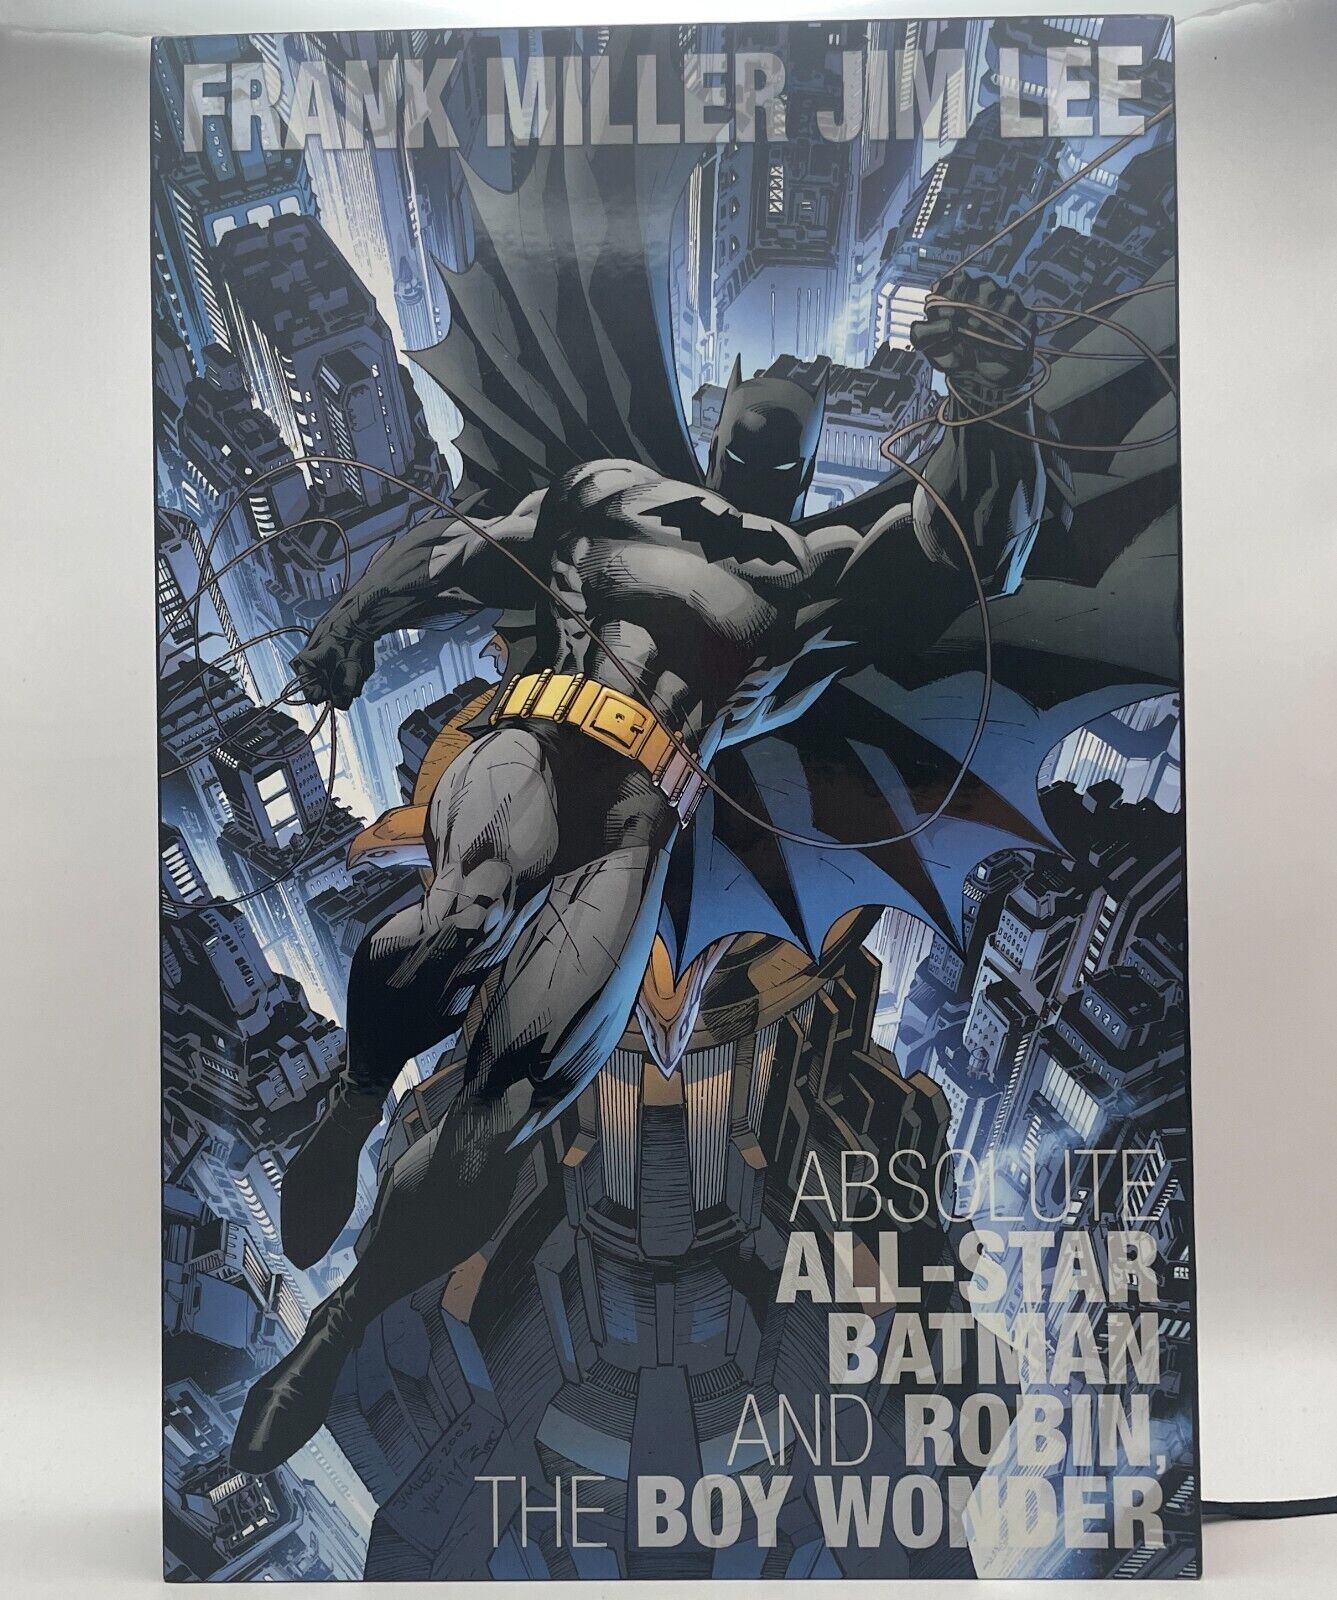 ABSOLUTE All-Star Batman And Robin The Boy Wonder Hardcover Book with Slipcase